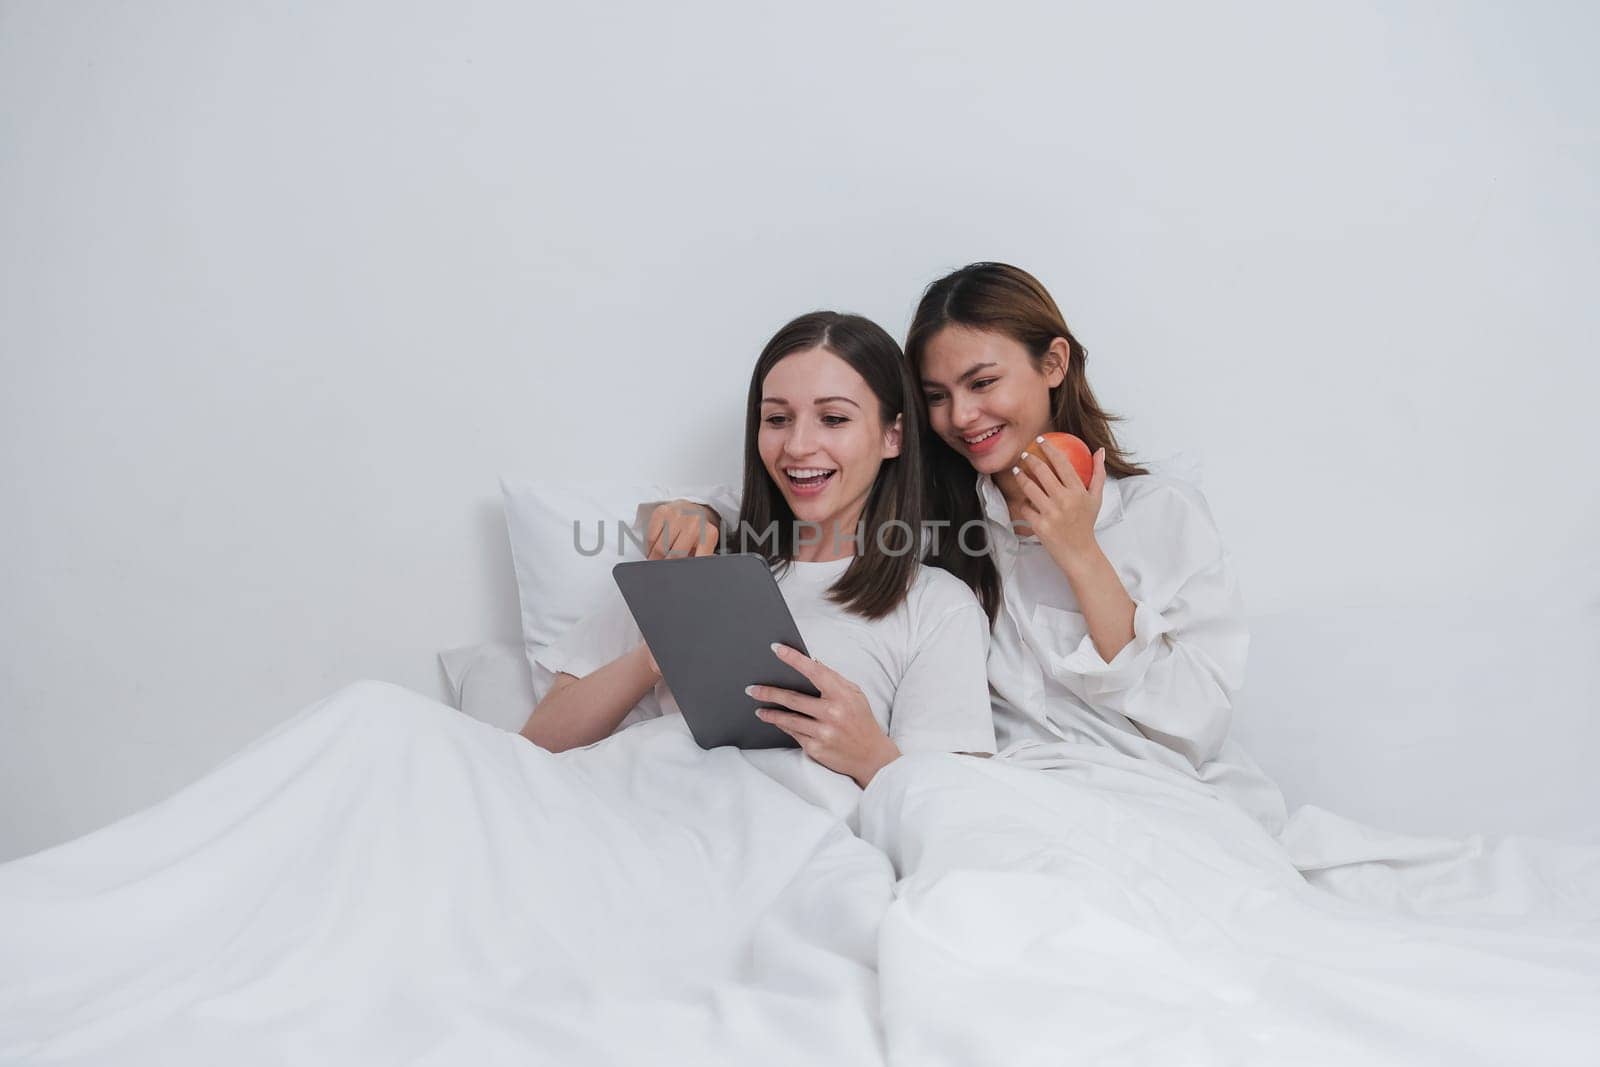 LBGT Couple of cute lesbian women waking up in the morning on white bed in bedroom while laughing and looking at tablet together.